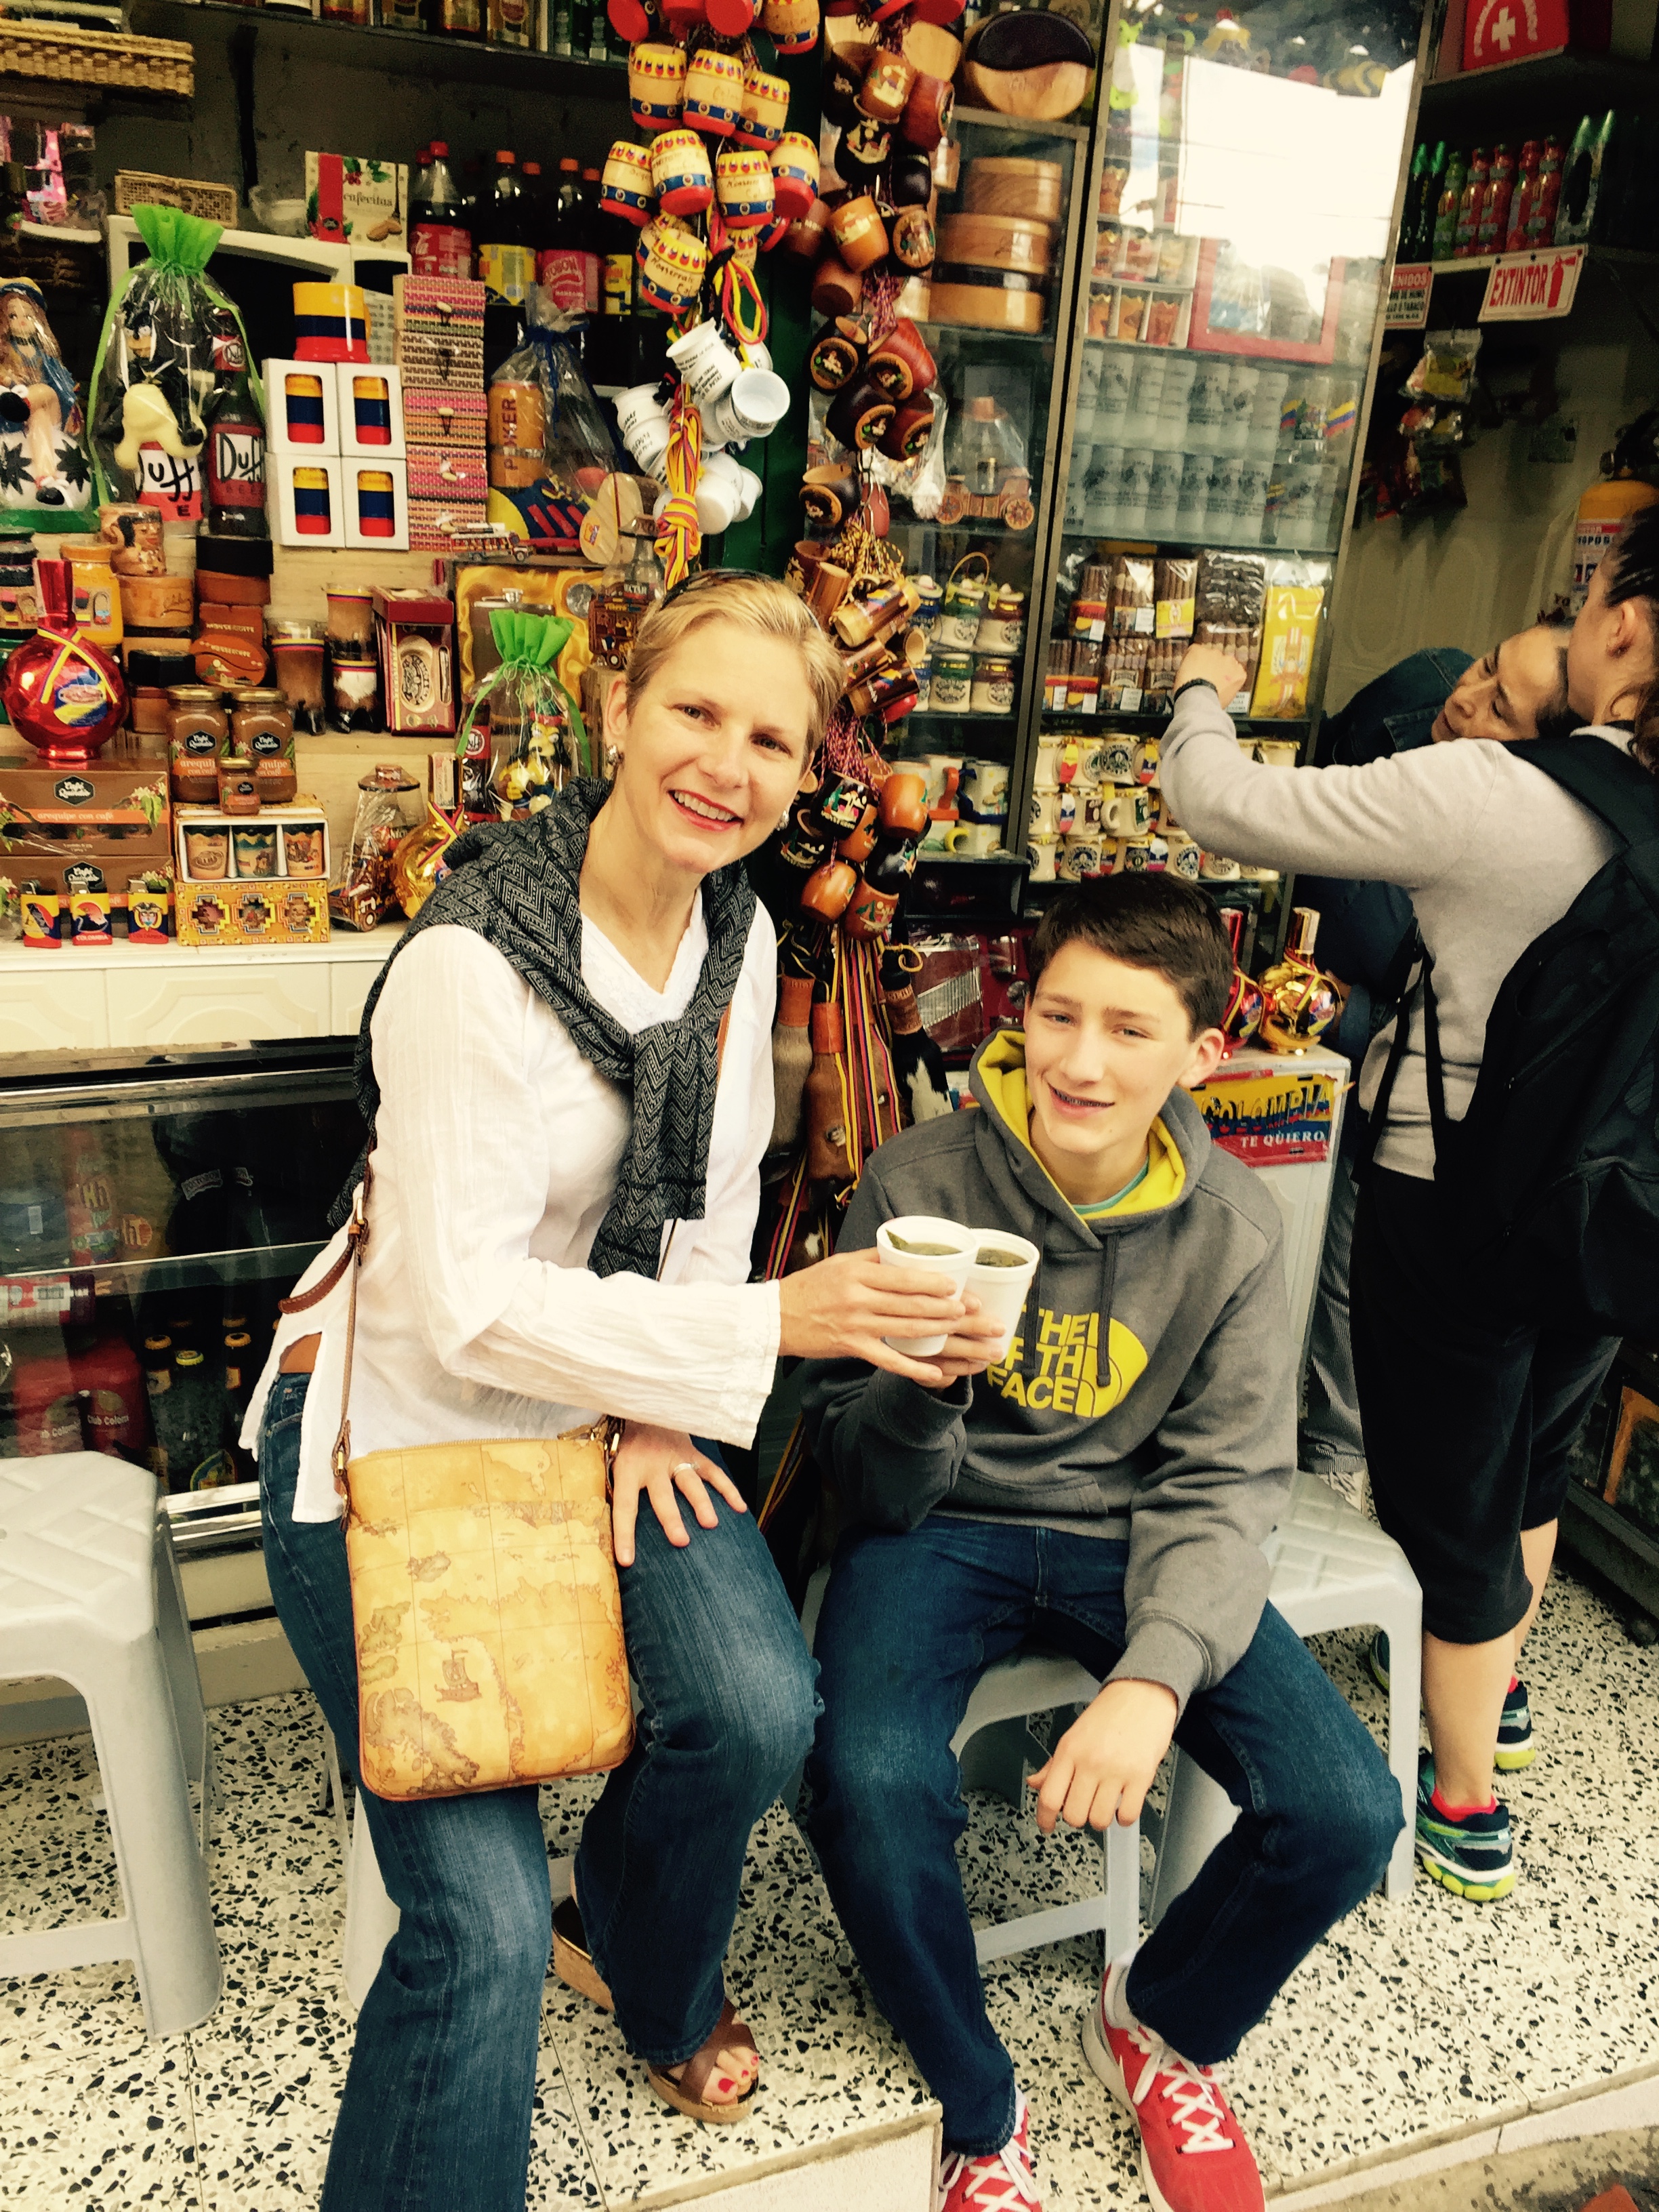 Drinking Mate at a Market in Bogota, Colombia